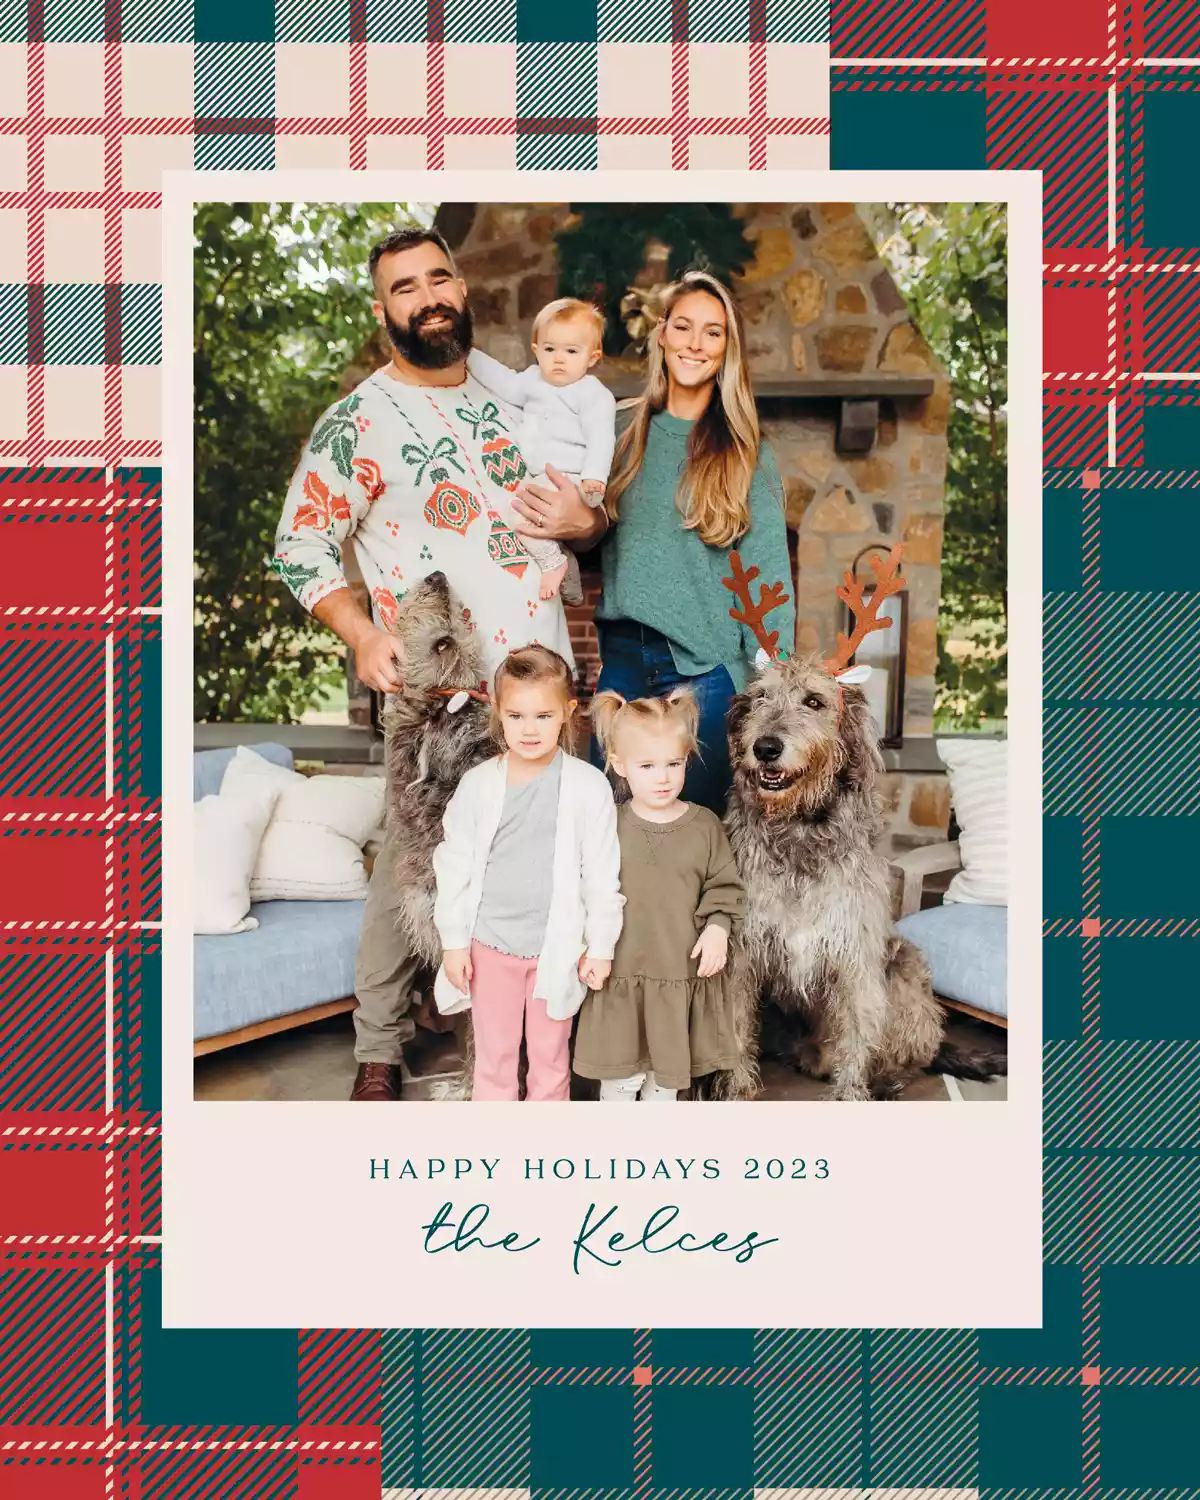 Jason Kelce and Wife Kylie Debut Their Family Holiday Card